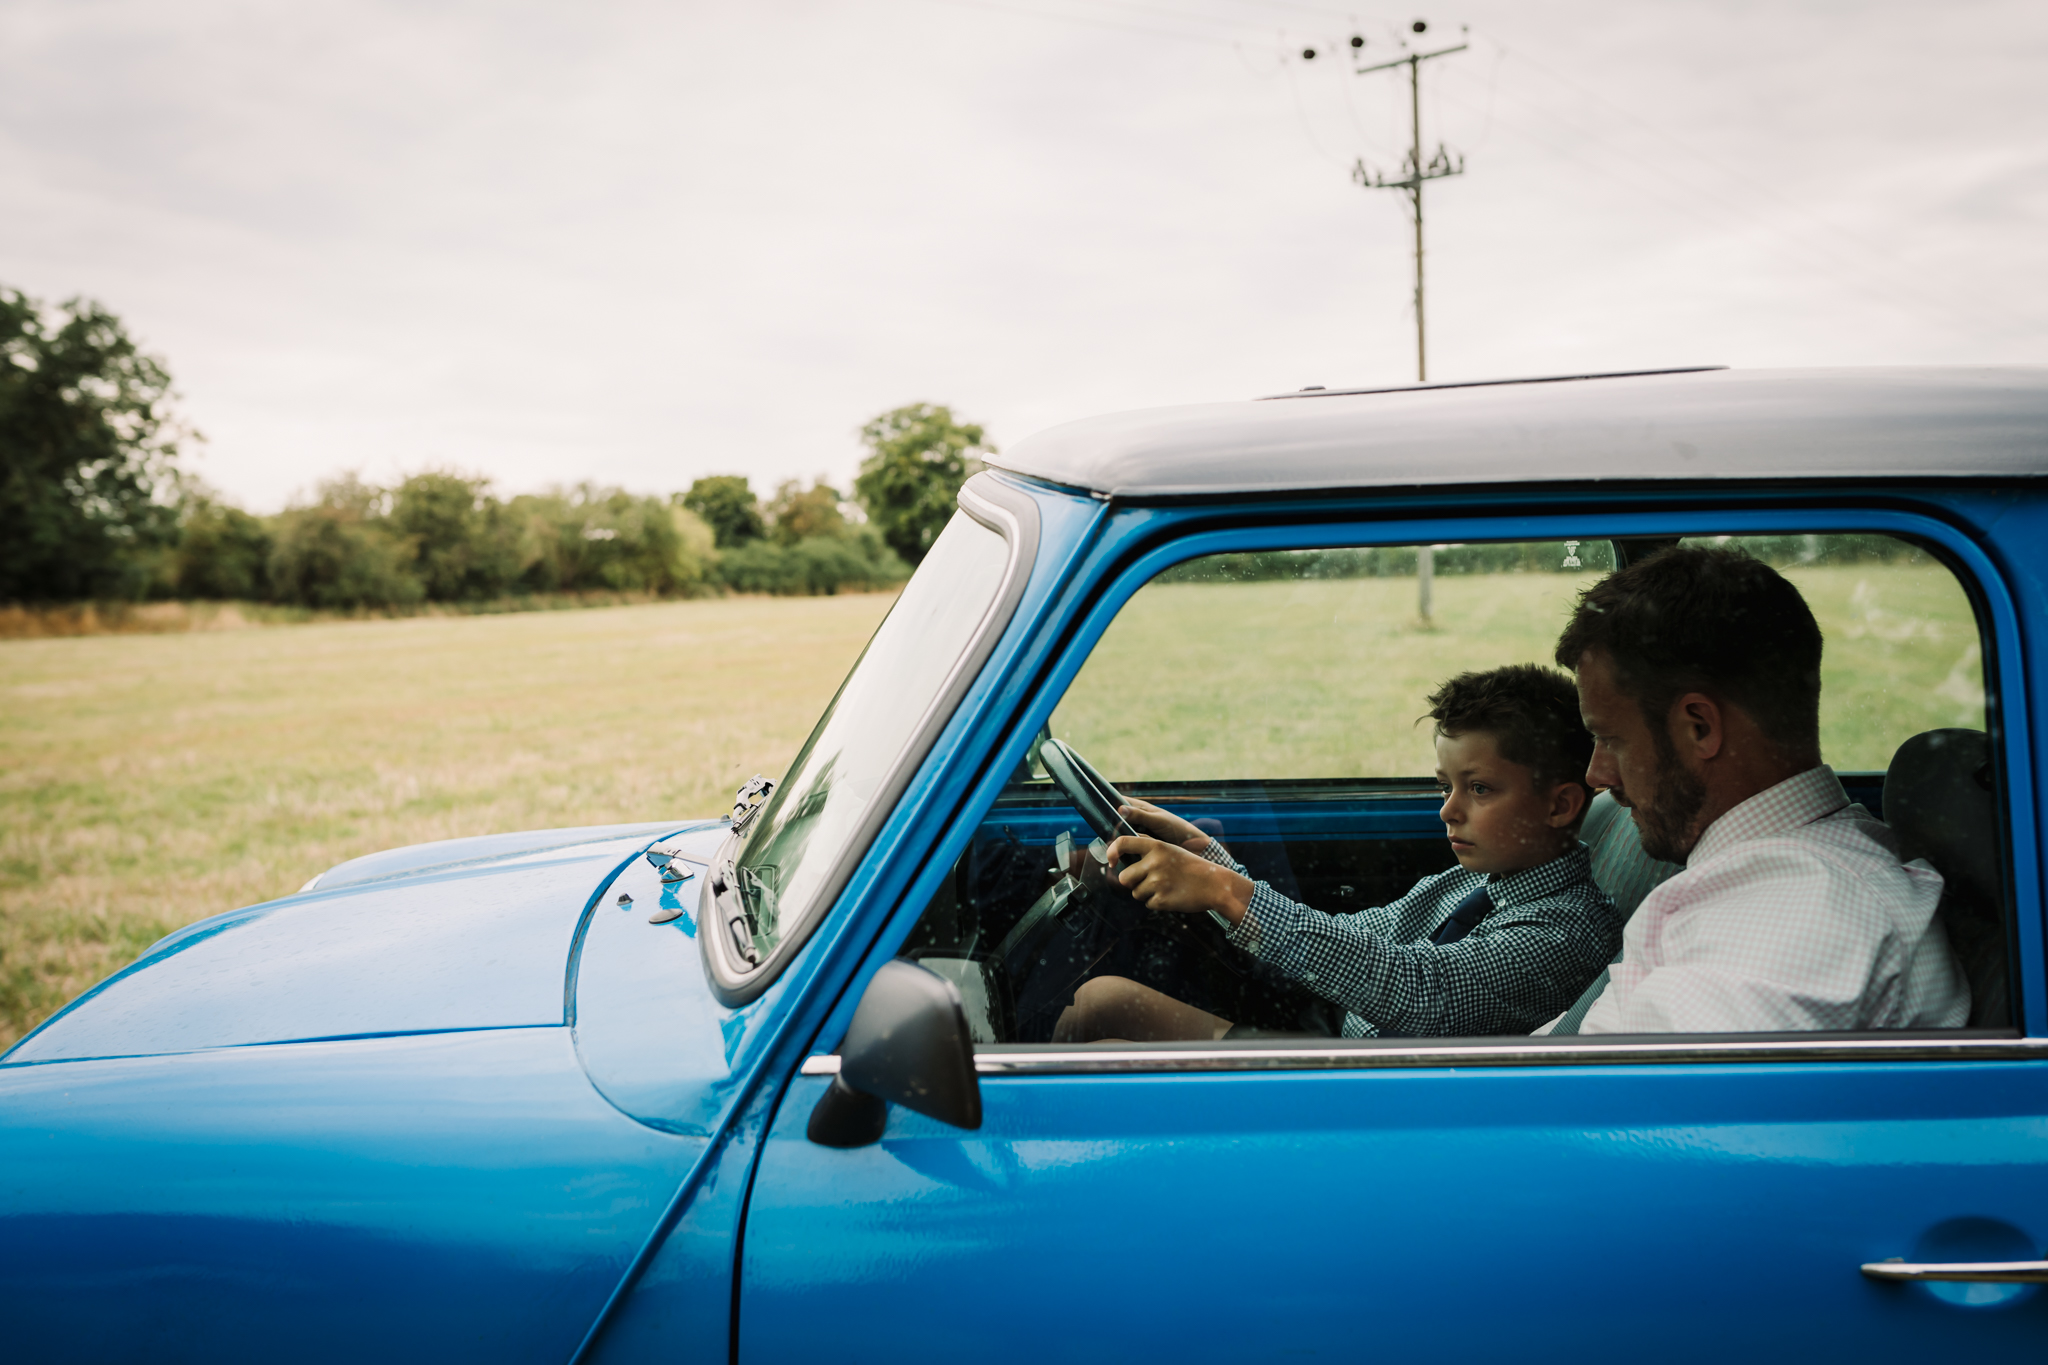 Hertfordshire Garden Party wedding Photographer captures young boy driving